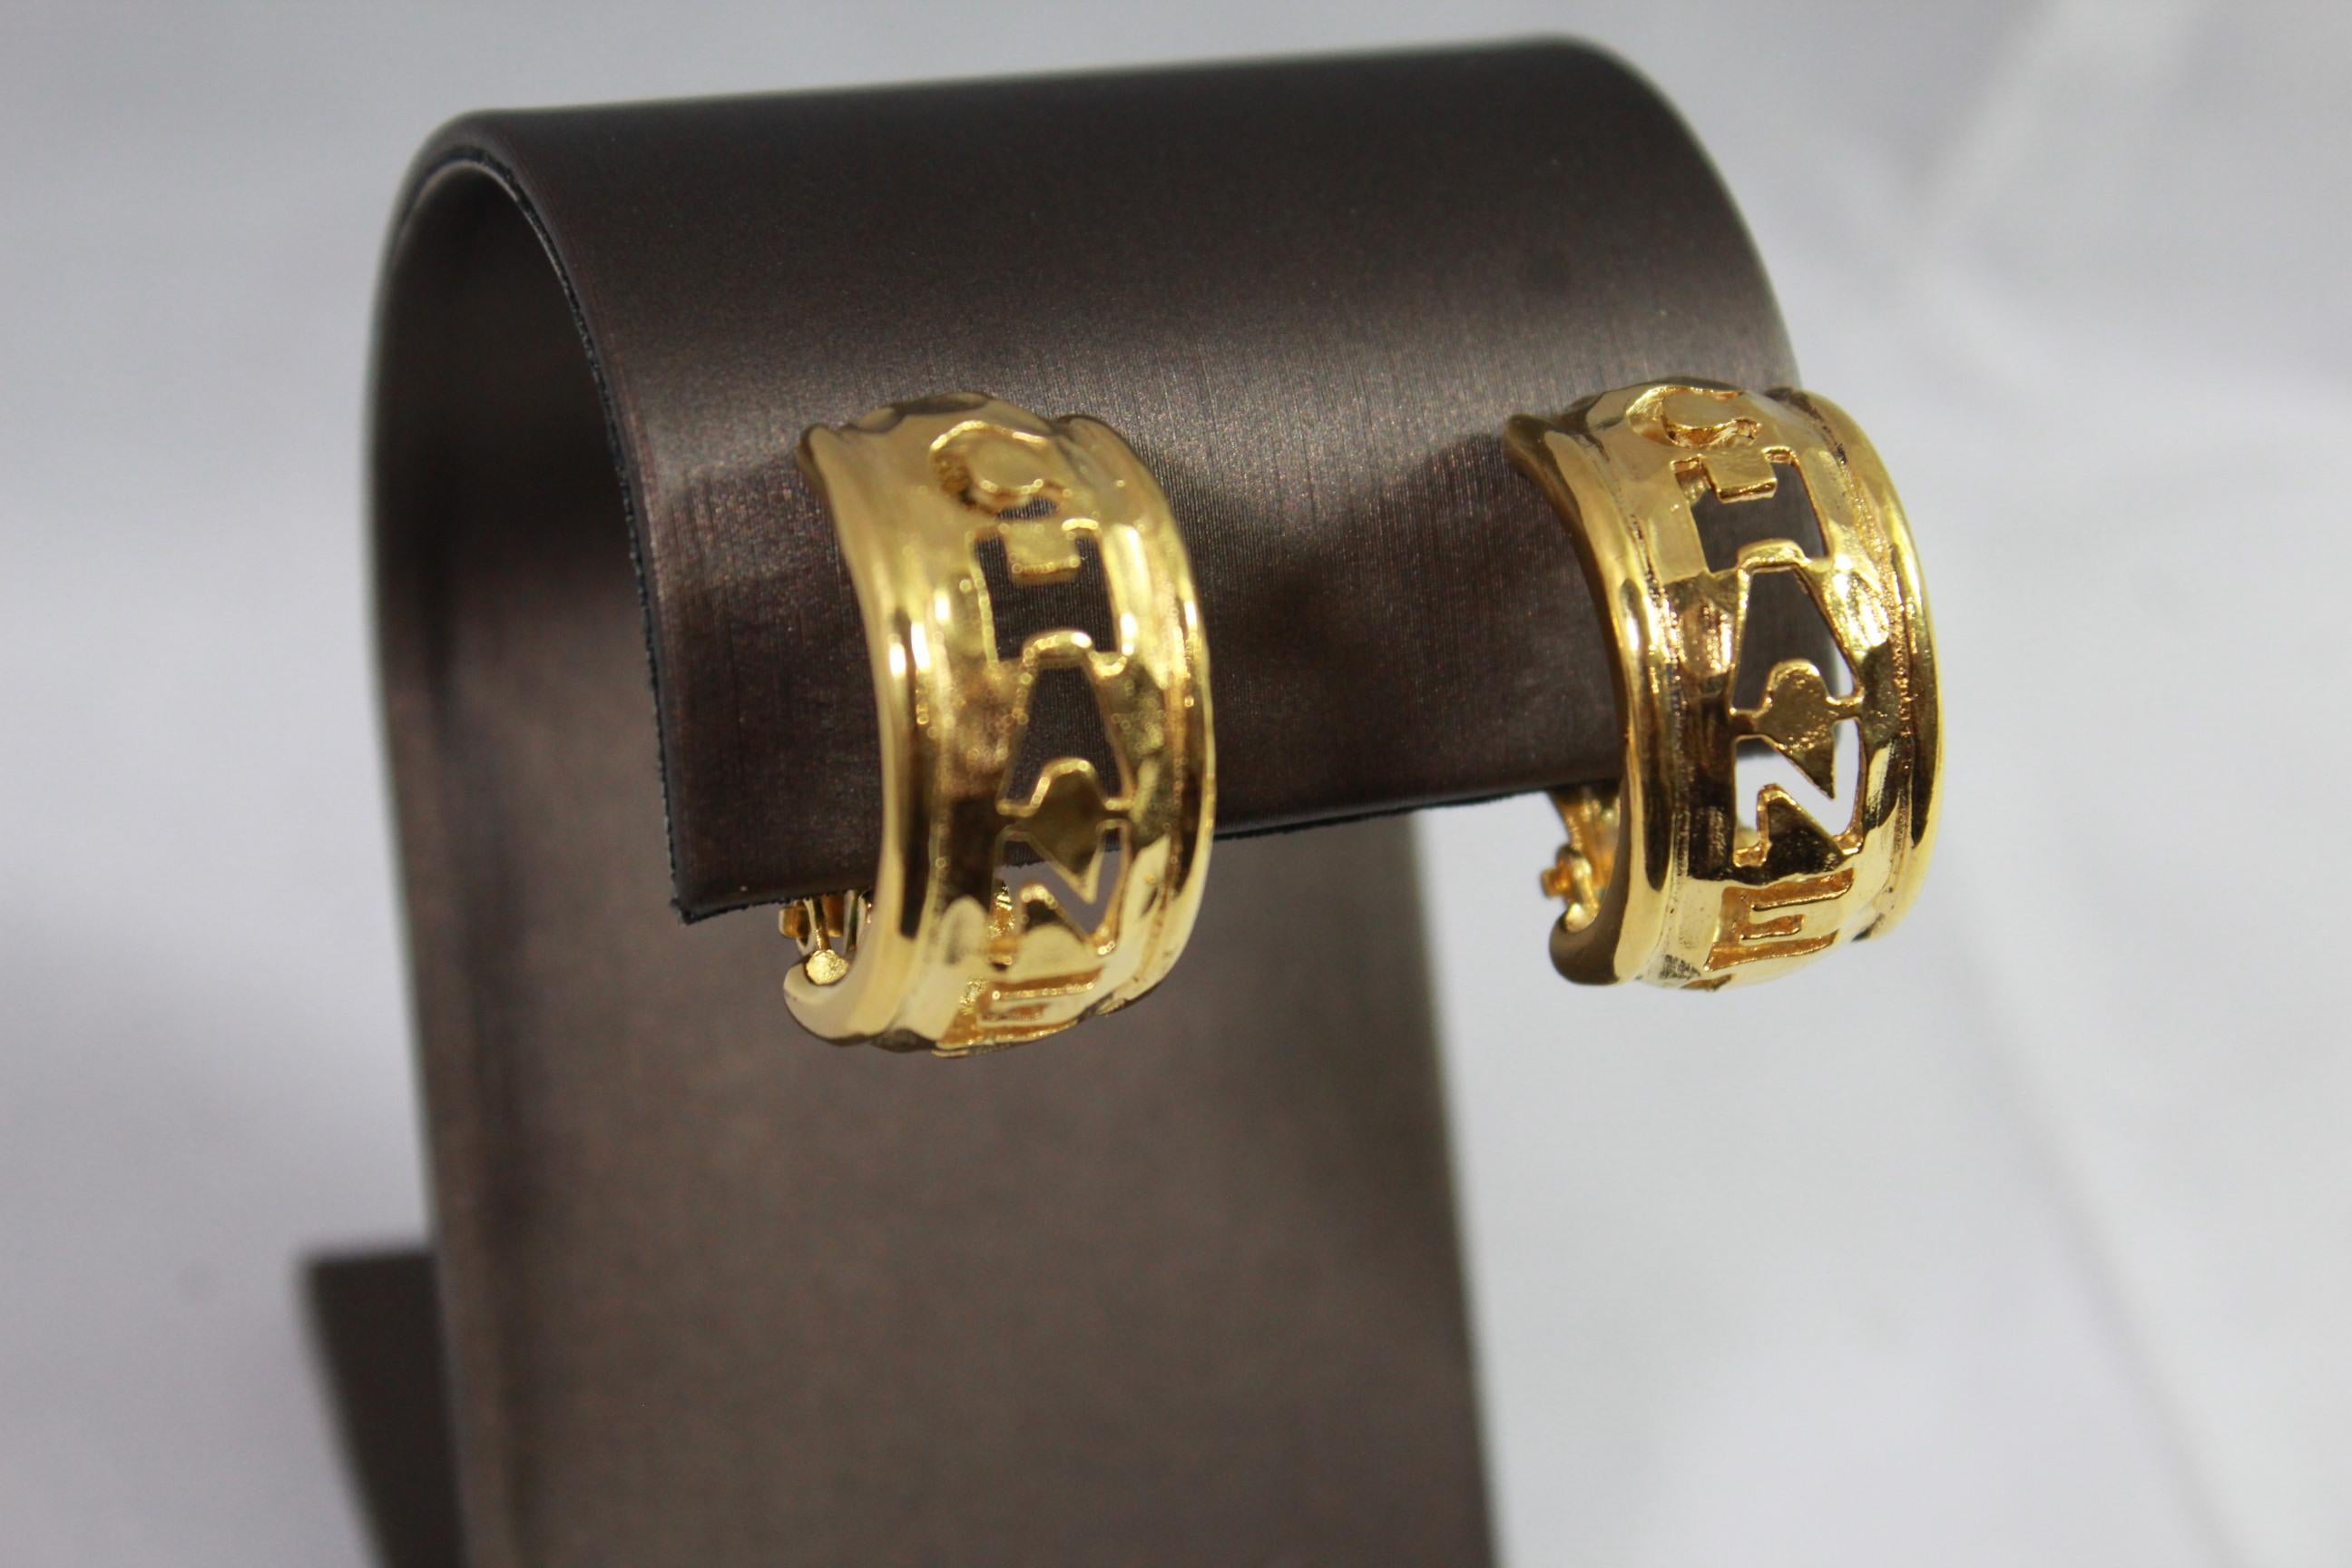 Vintage Chanel earrings in gold plated metal. 
Good vintage condition.
Height 2.5 cm
Clip system